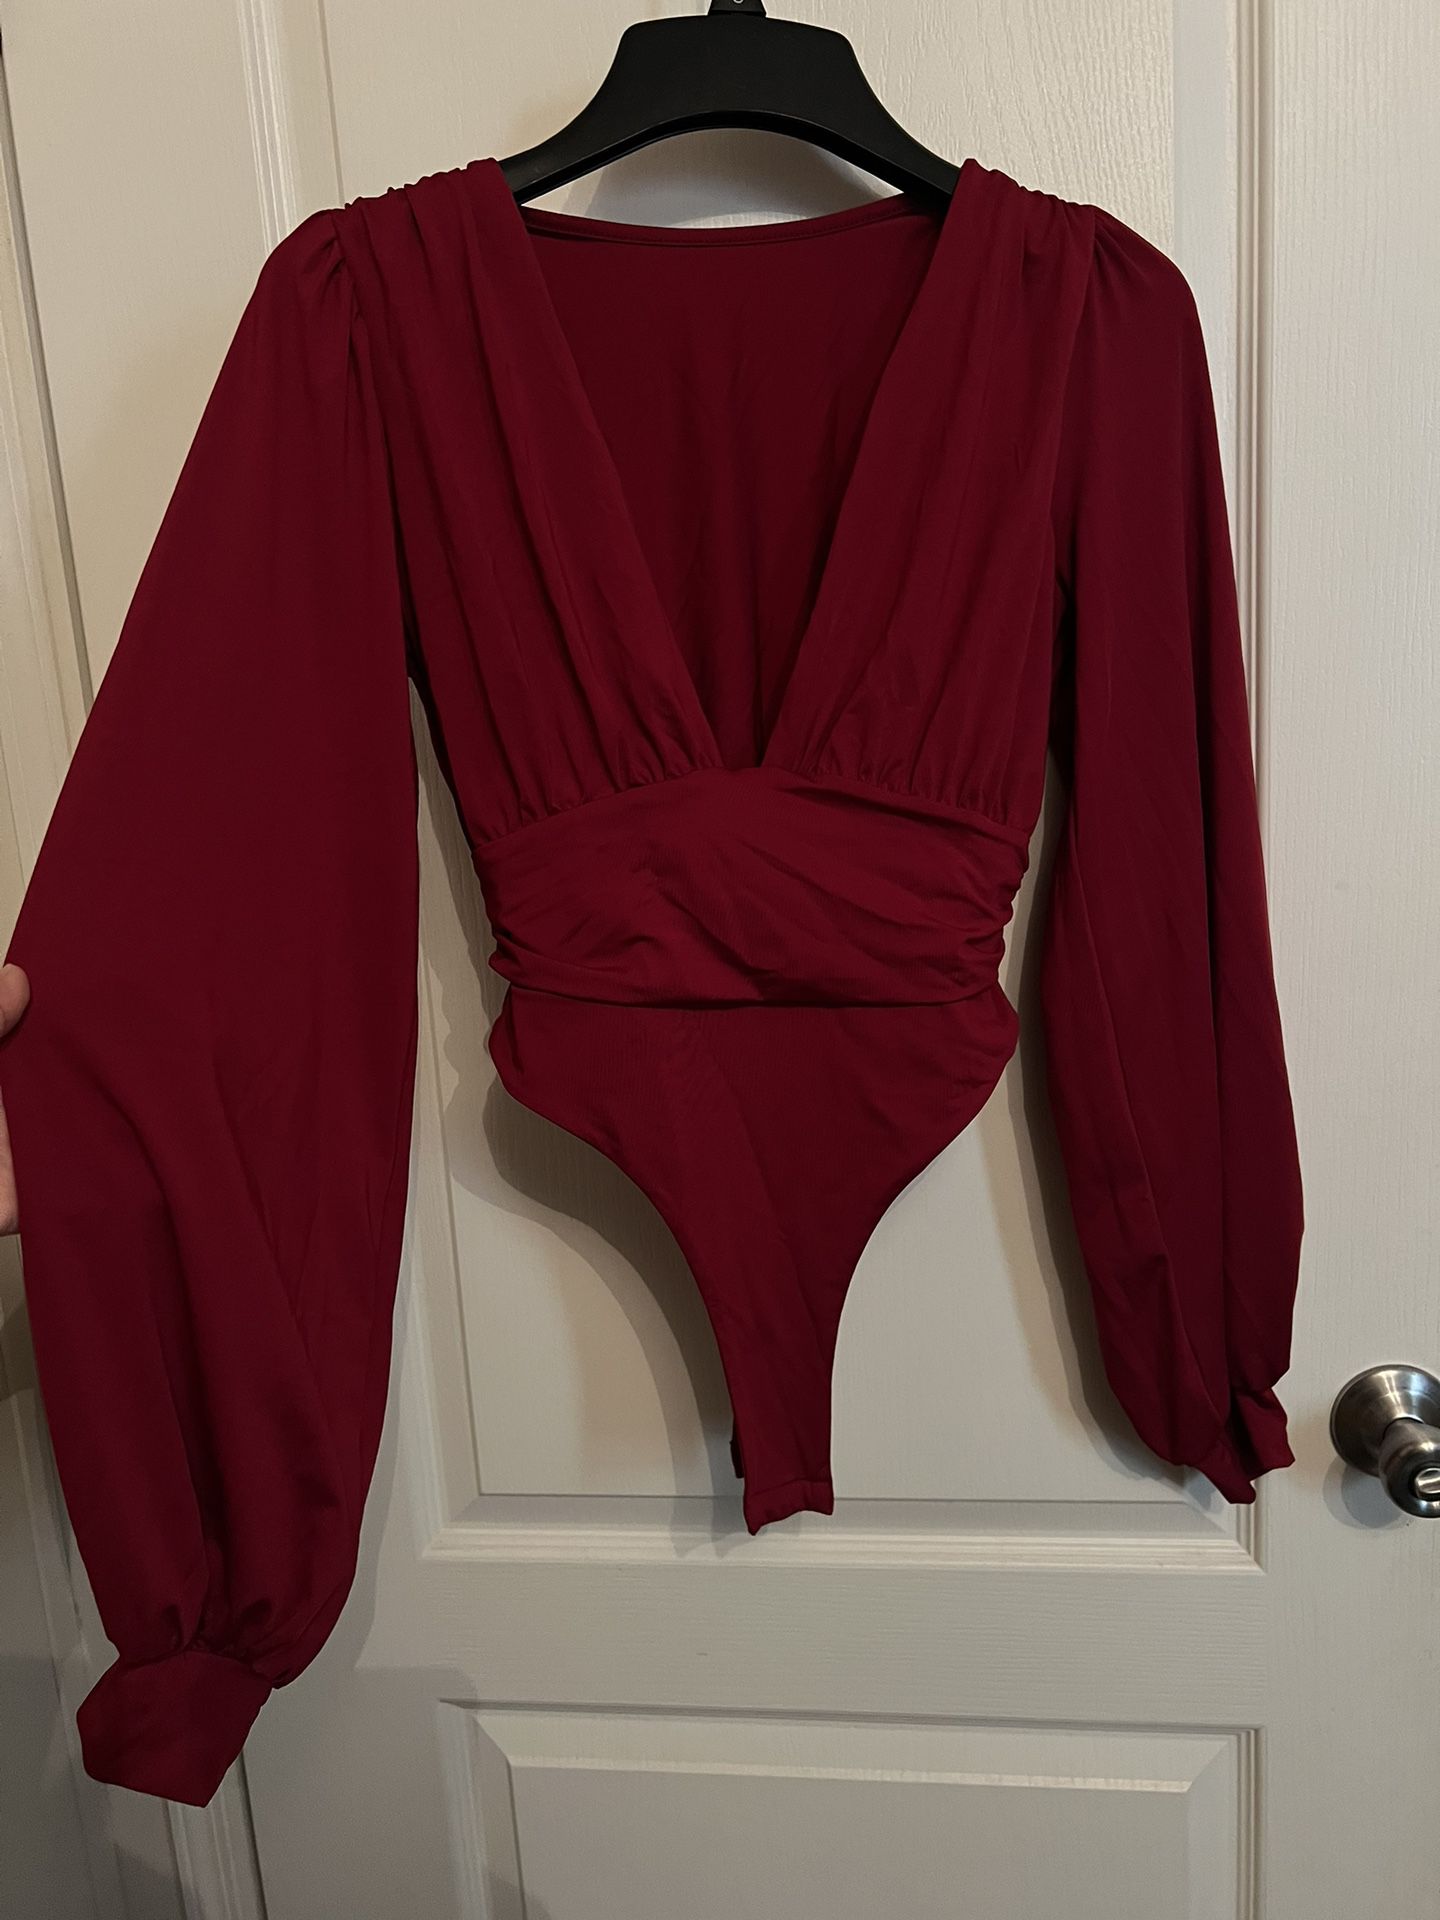 NWOT🏷️ Red Wine Color Dressy Low Cut Bubble Long Sleeve Bodysuit 🍷🌹 ( Dressy Bodysuit/ Red Bodysuit/sexy Outer Wear / Club Wear)